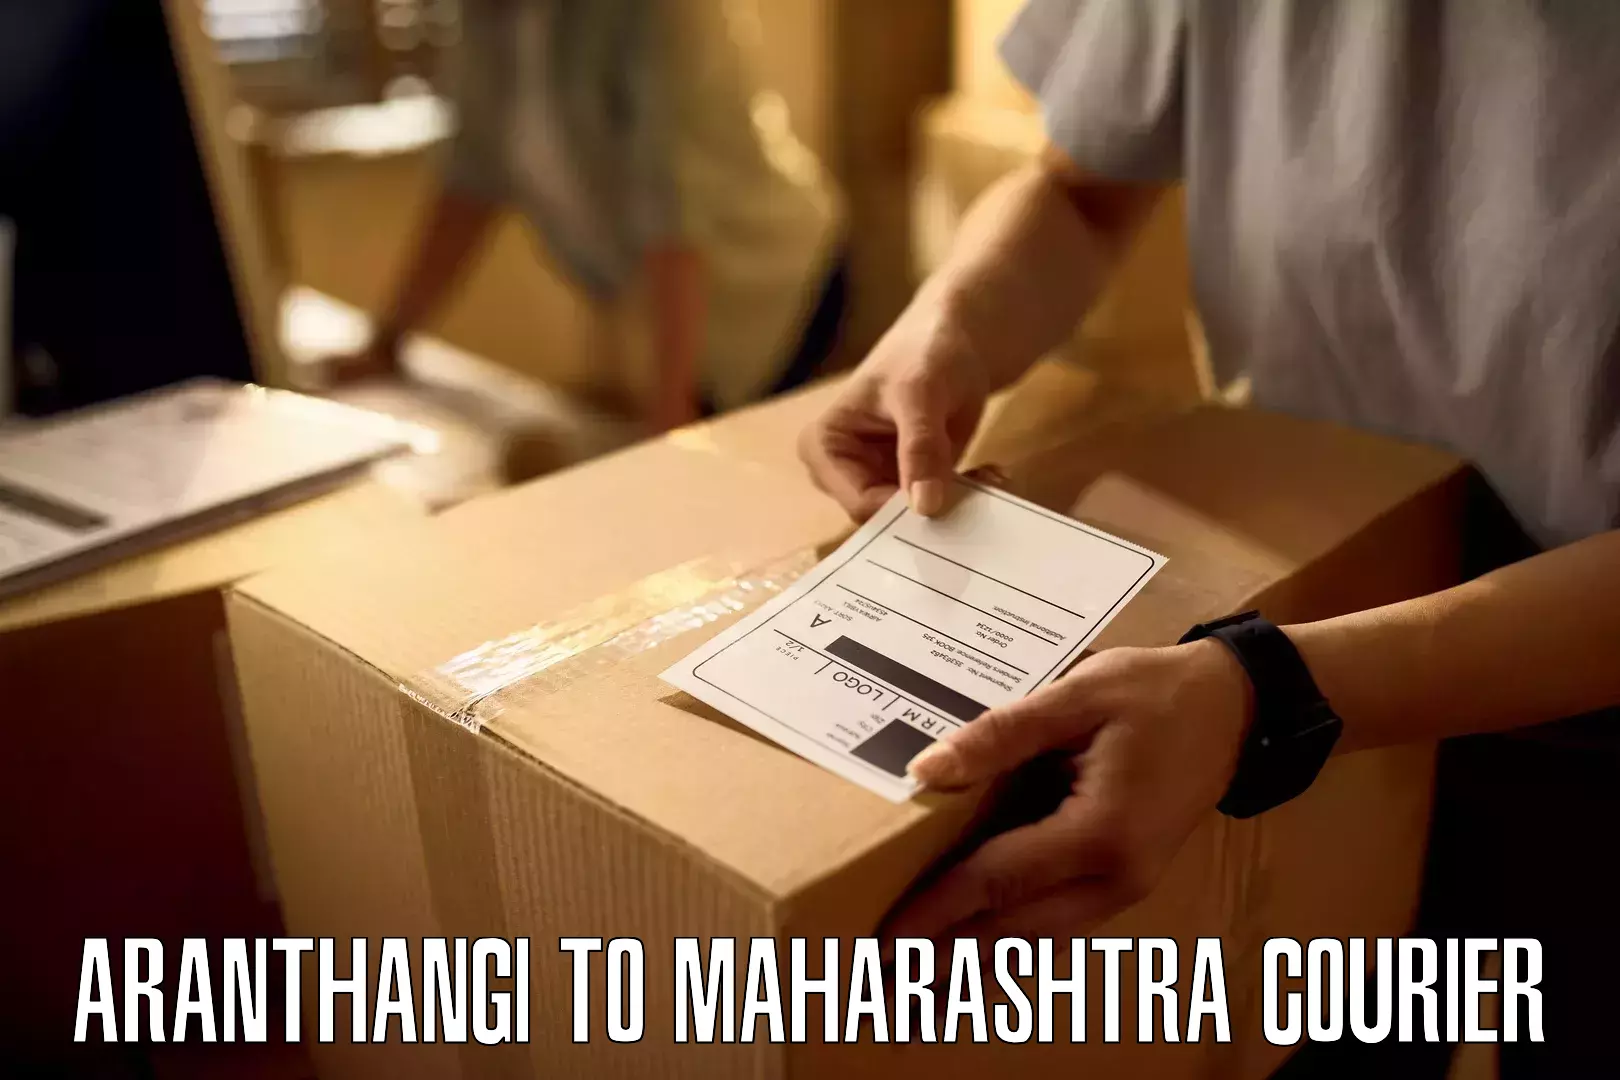 On-call courier service Aranthangi to Ahmednagar